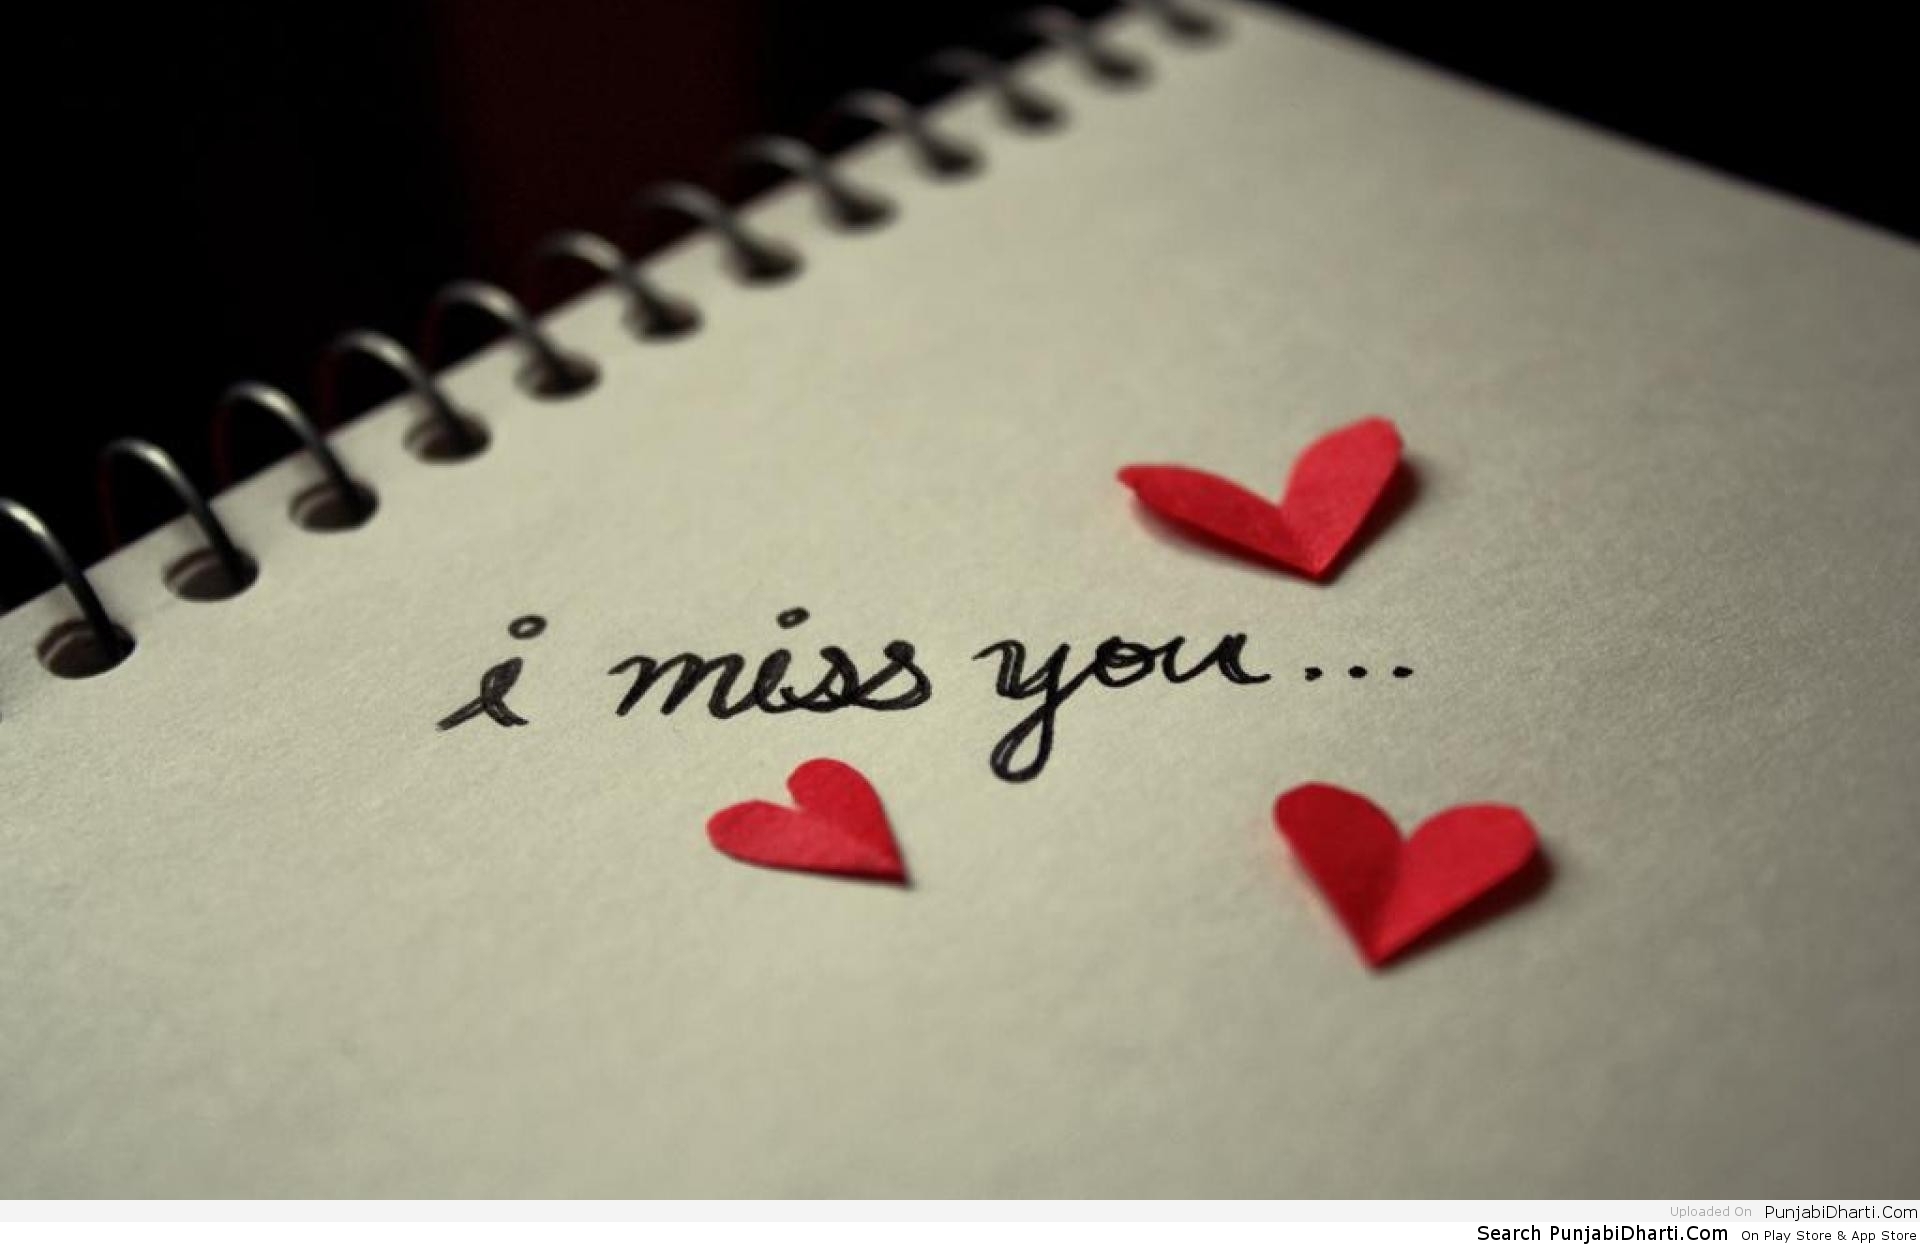 I Miss You Graphics,Images For Facebook, Whatsapp, Twitter